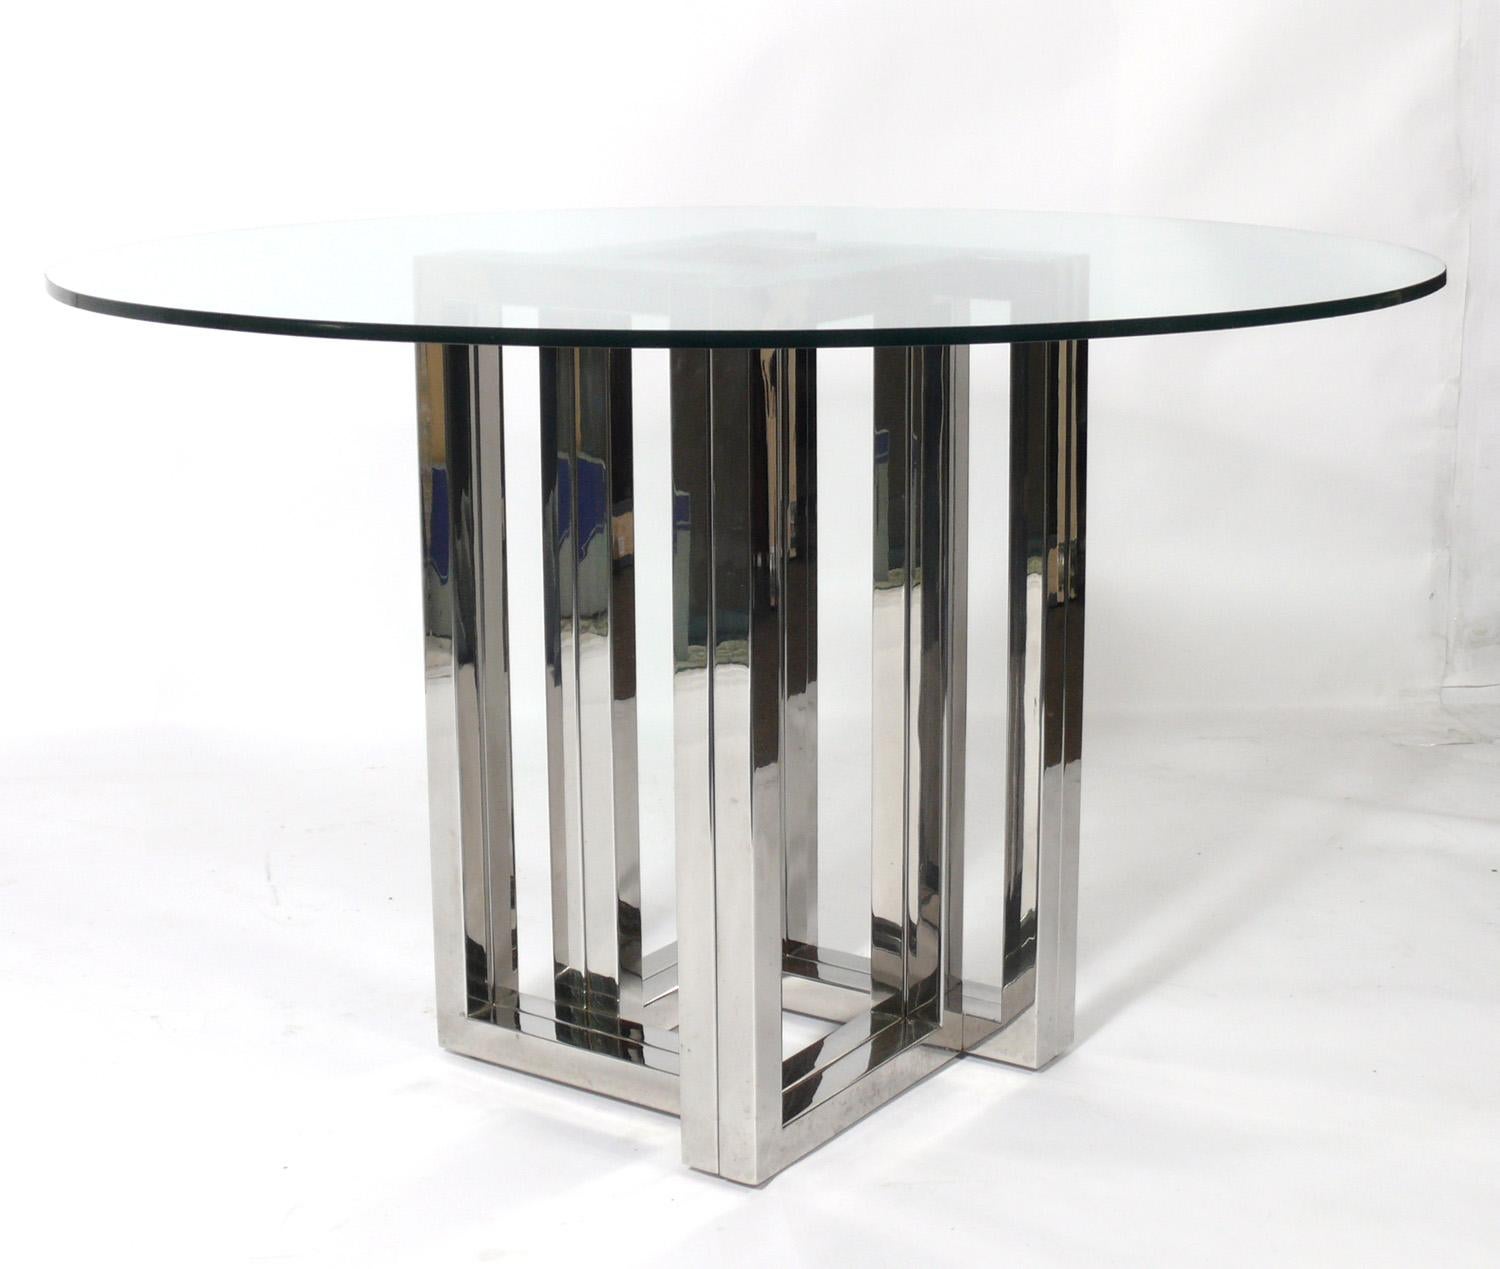 Mid-Century Modern chrome dining table, designed in the style of Milo Baughman, unsigned, American, circa 1960s. Please see our otherdining chairs from the same estate seen in the last photo. This listing is for the dining table only. The original